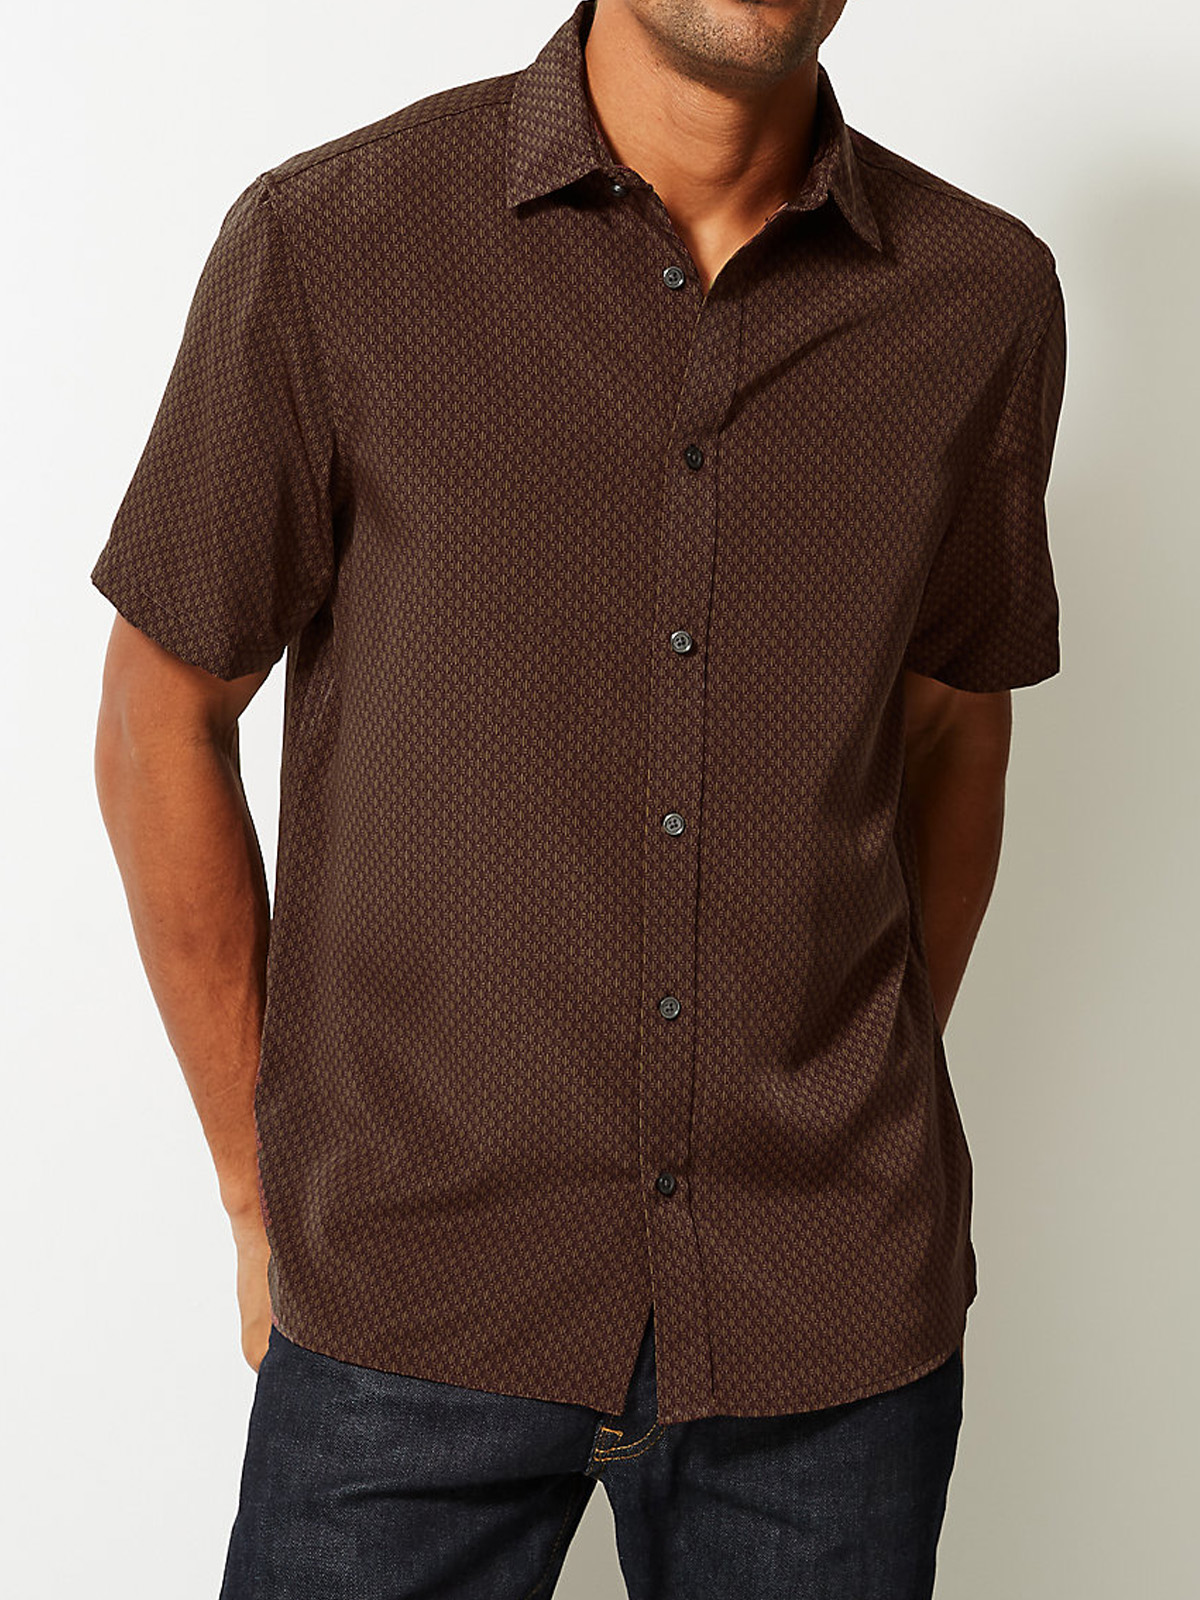 Marks and Spencer - - M&5 BROWN Mens Pure Cotton Geo Print Short Sleeve